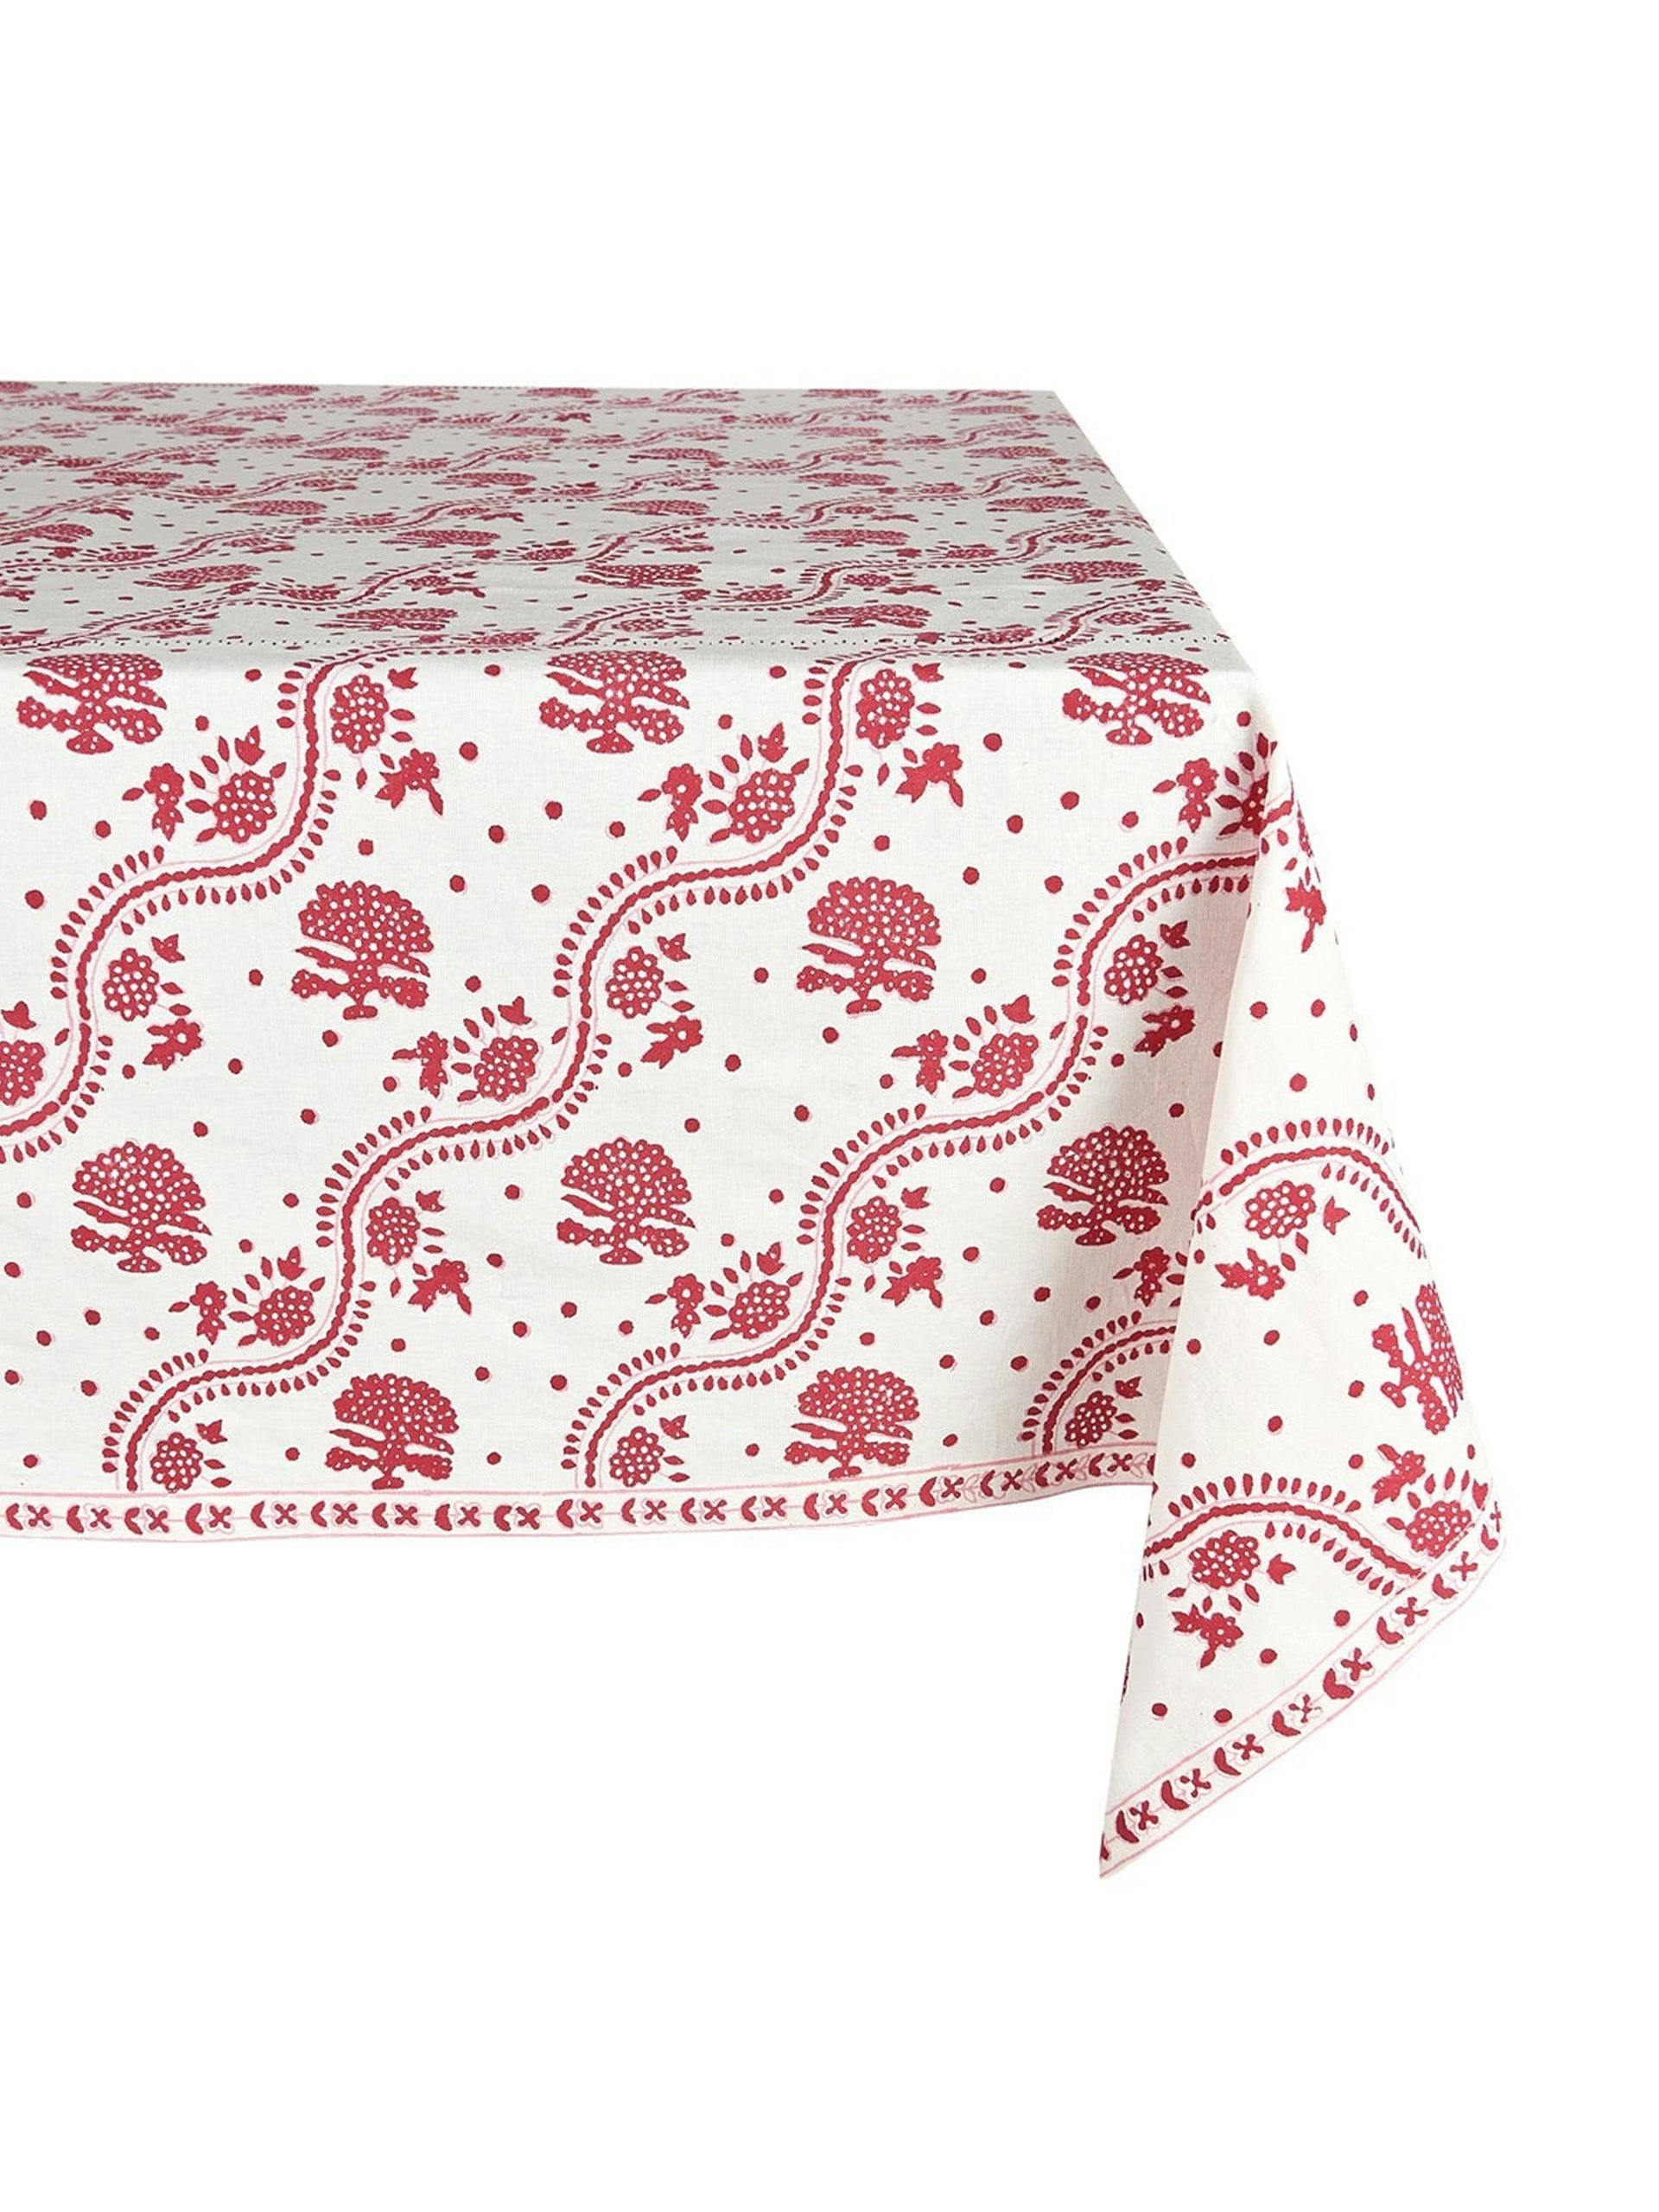 Kalee red tablecloth